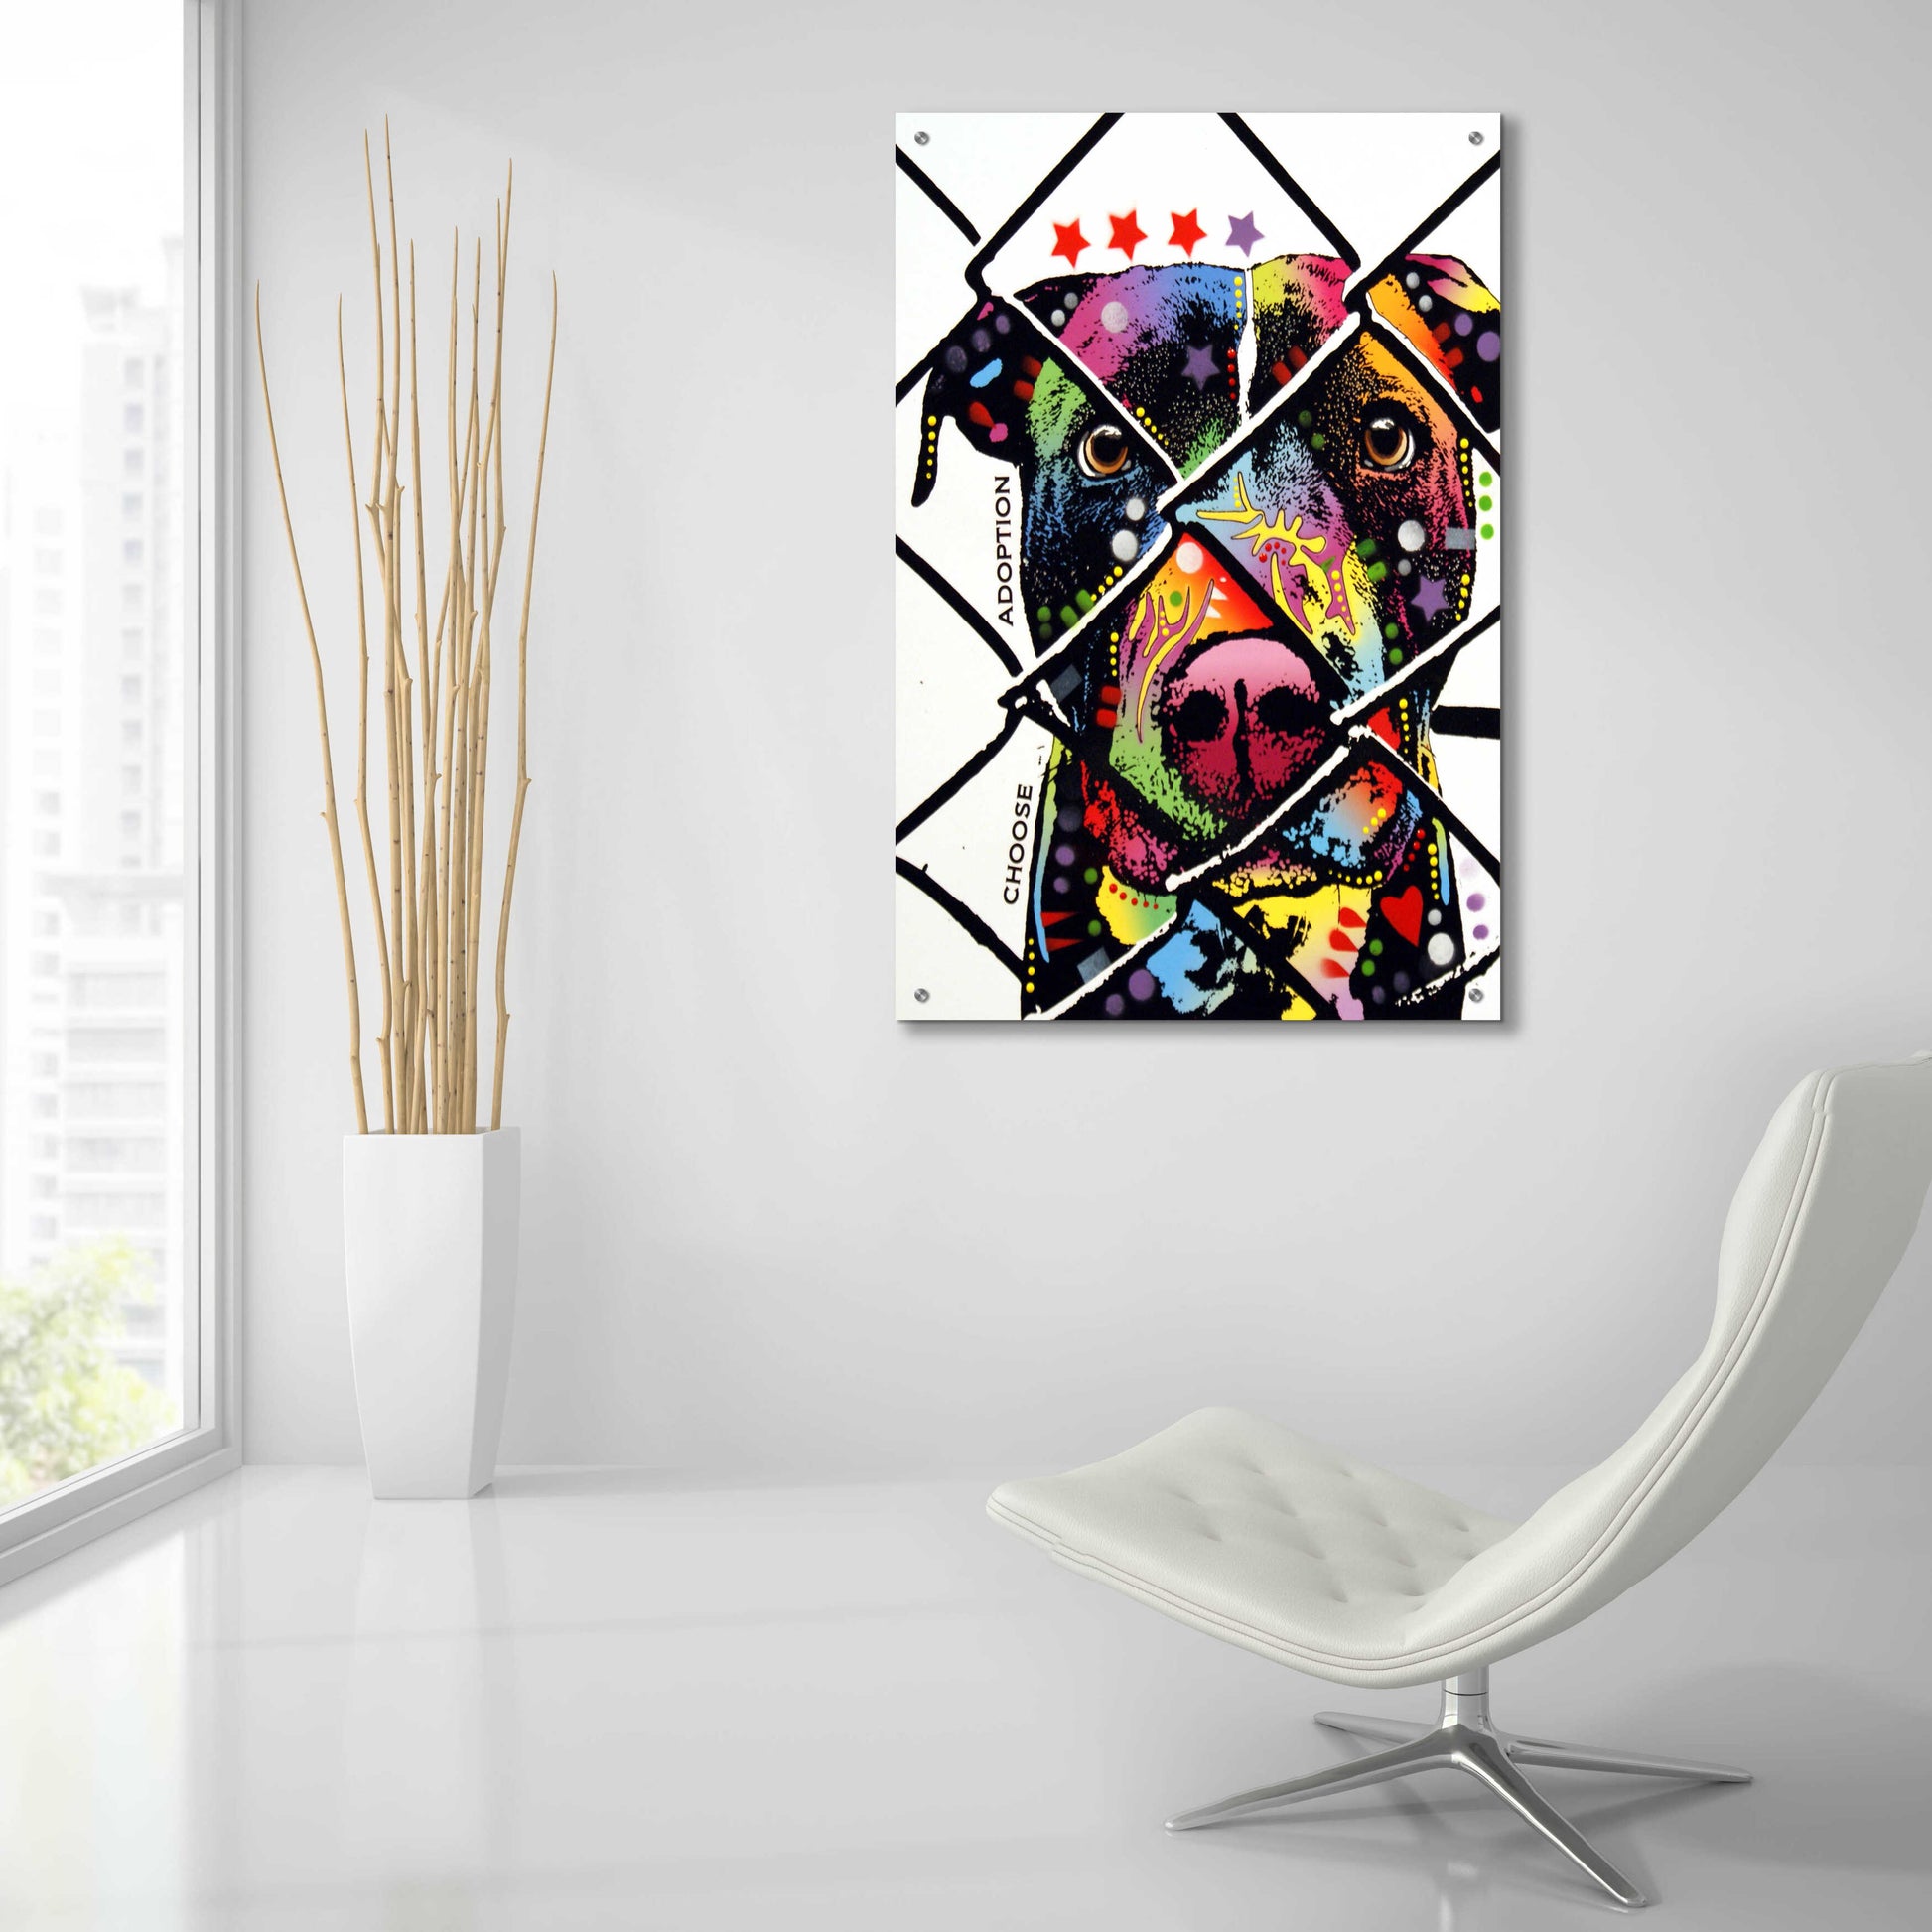 Epic Art 'Choose Adoption' by Dean Russo, Acrylic Glass Wall Art,24x36